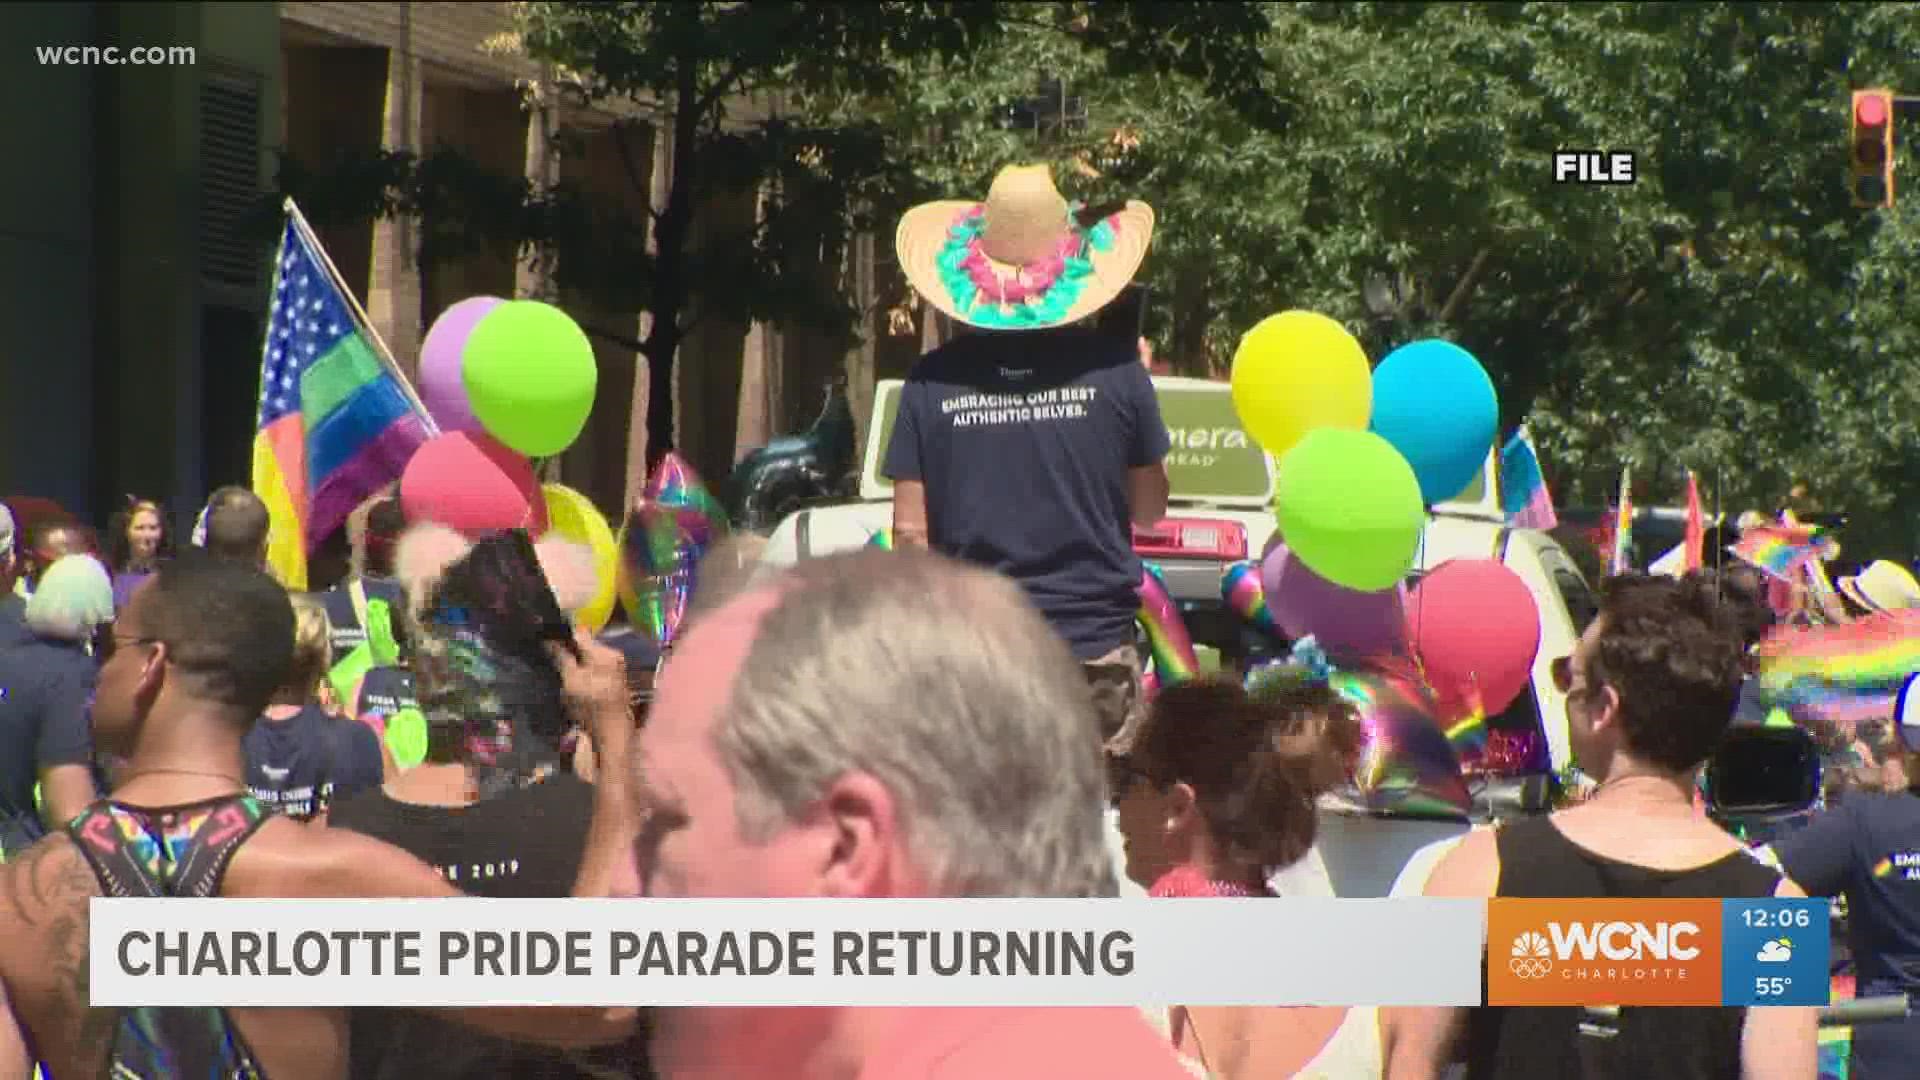 After two years with no Pride parade or in-person festivities due to the pandemic, the Queen City's largest parade will be back this summer.